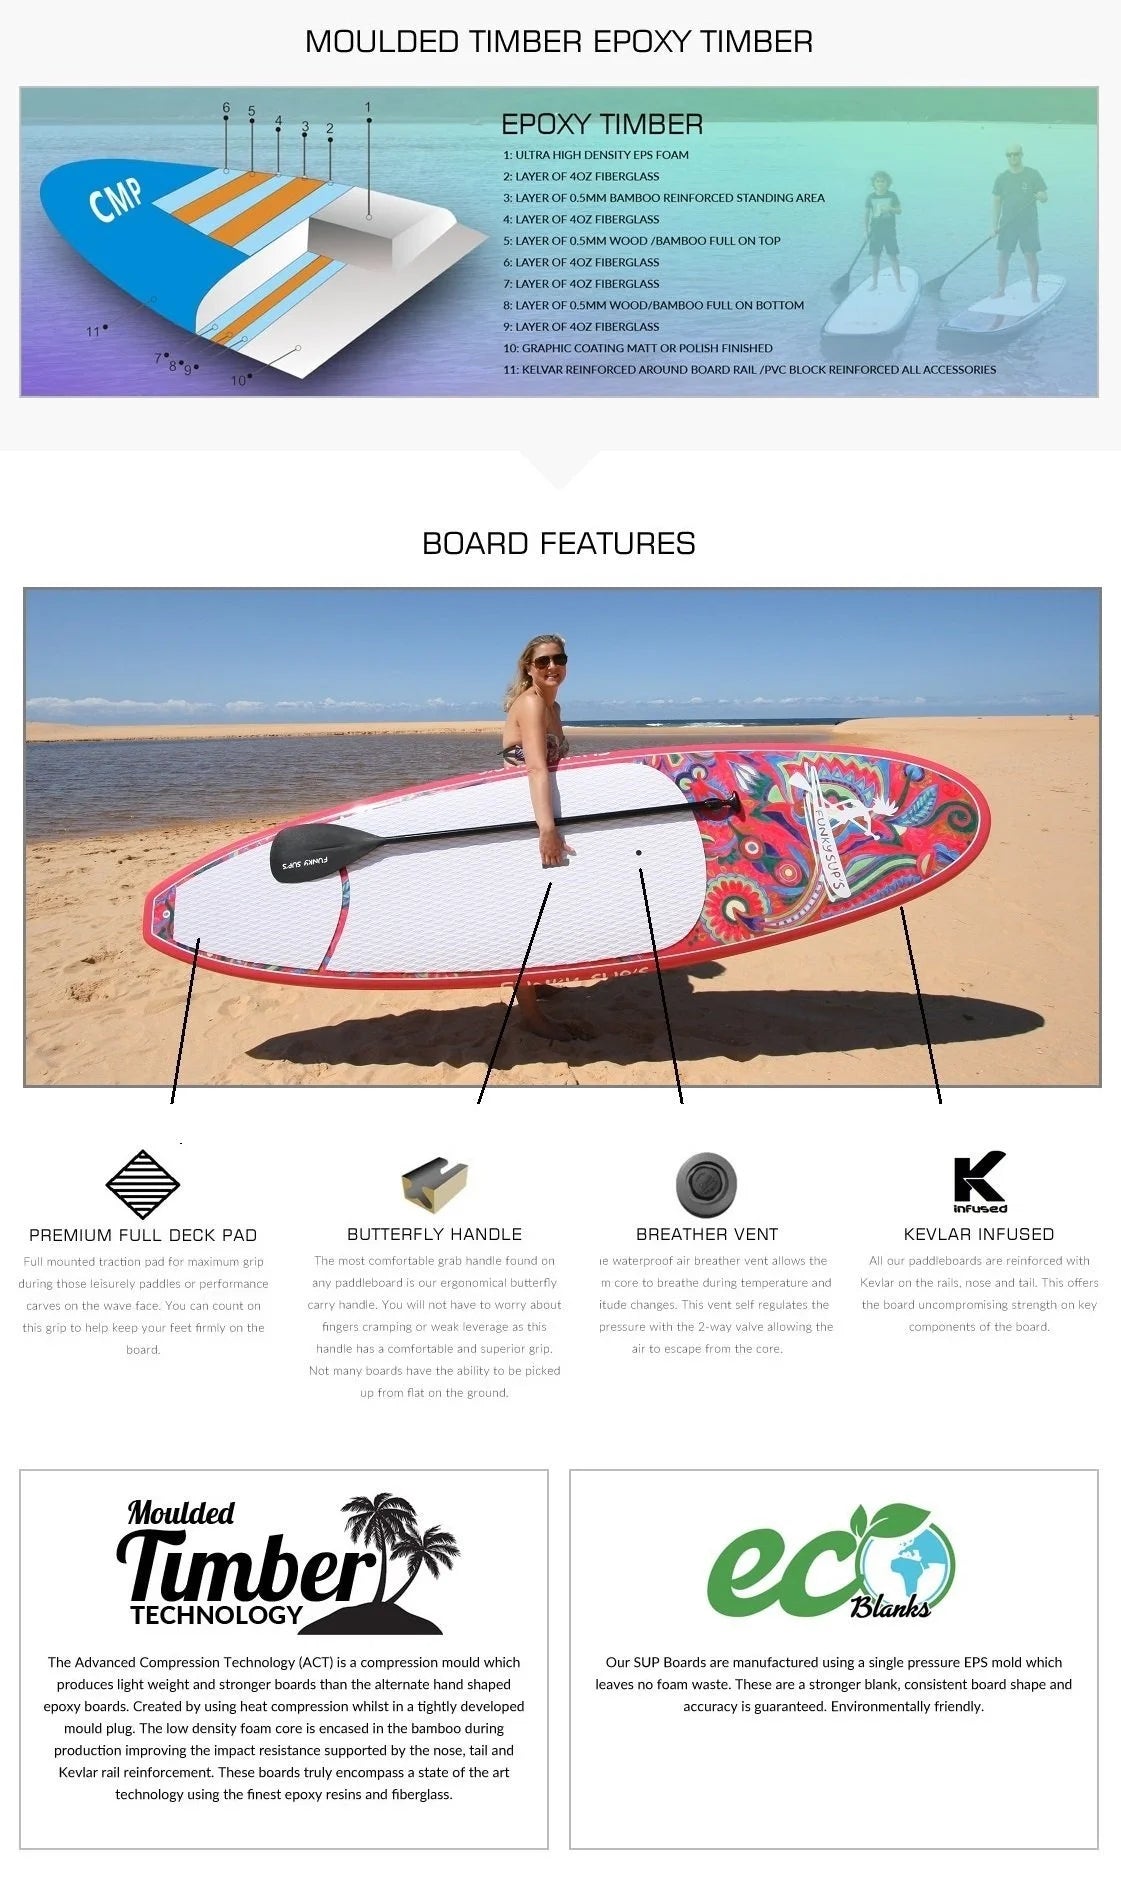 FUNKY SUPS Flower Power SUP features and construction